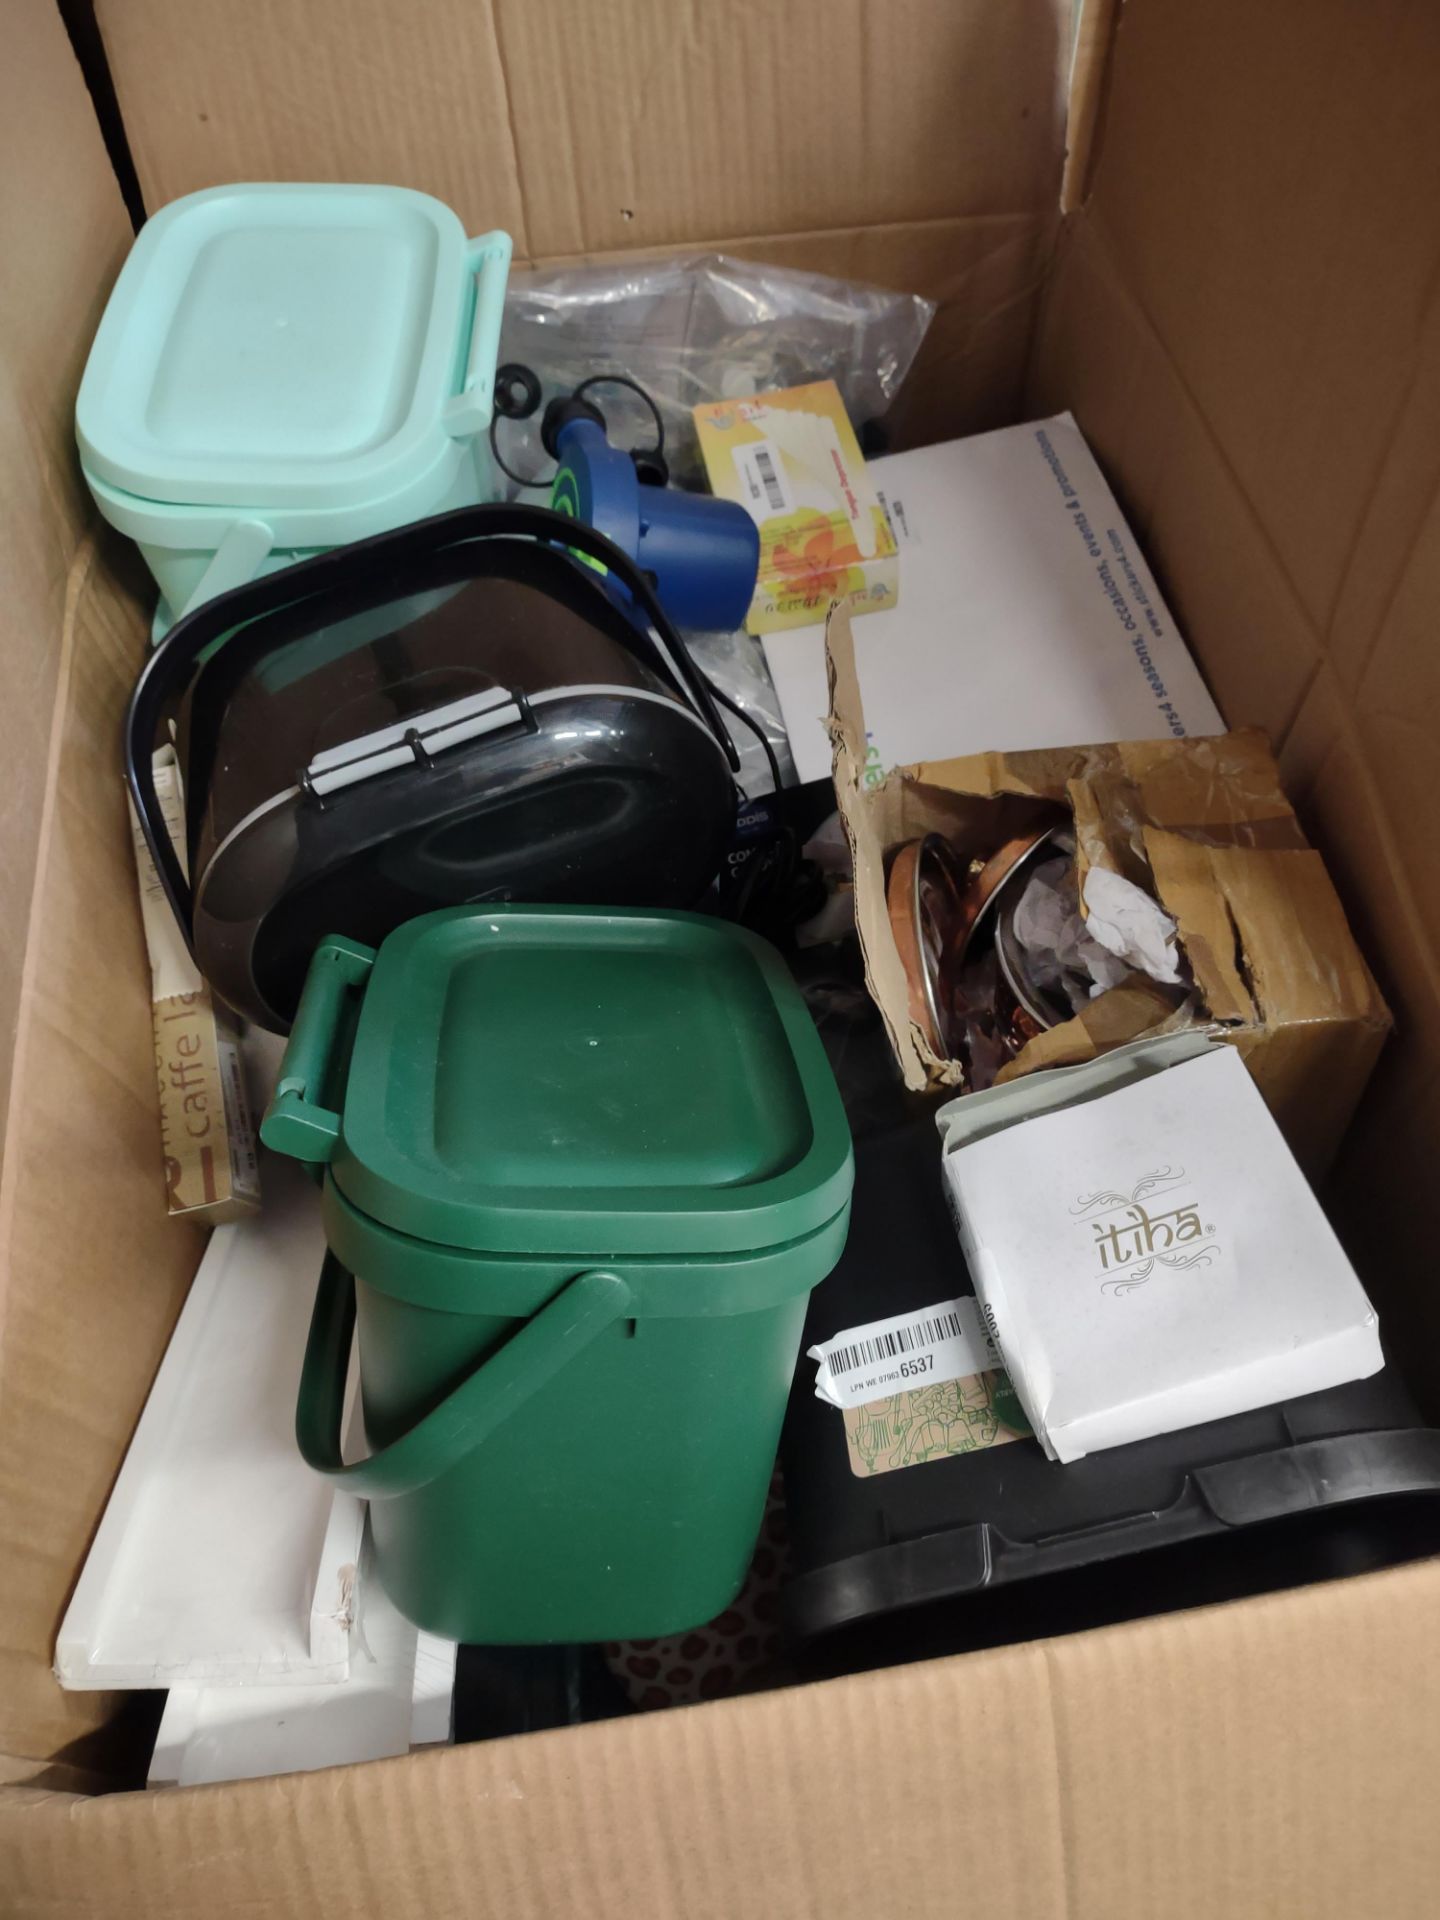 Assorted box to contain electronics and housewares, Approx. RRP £250 - Grade U